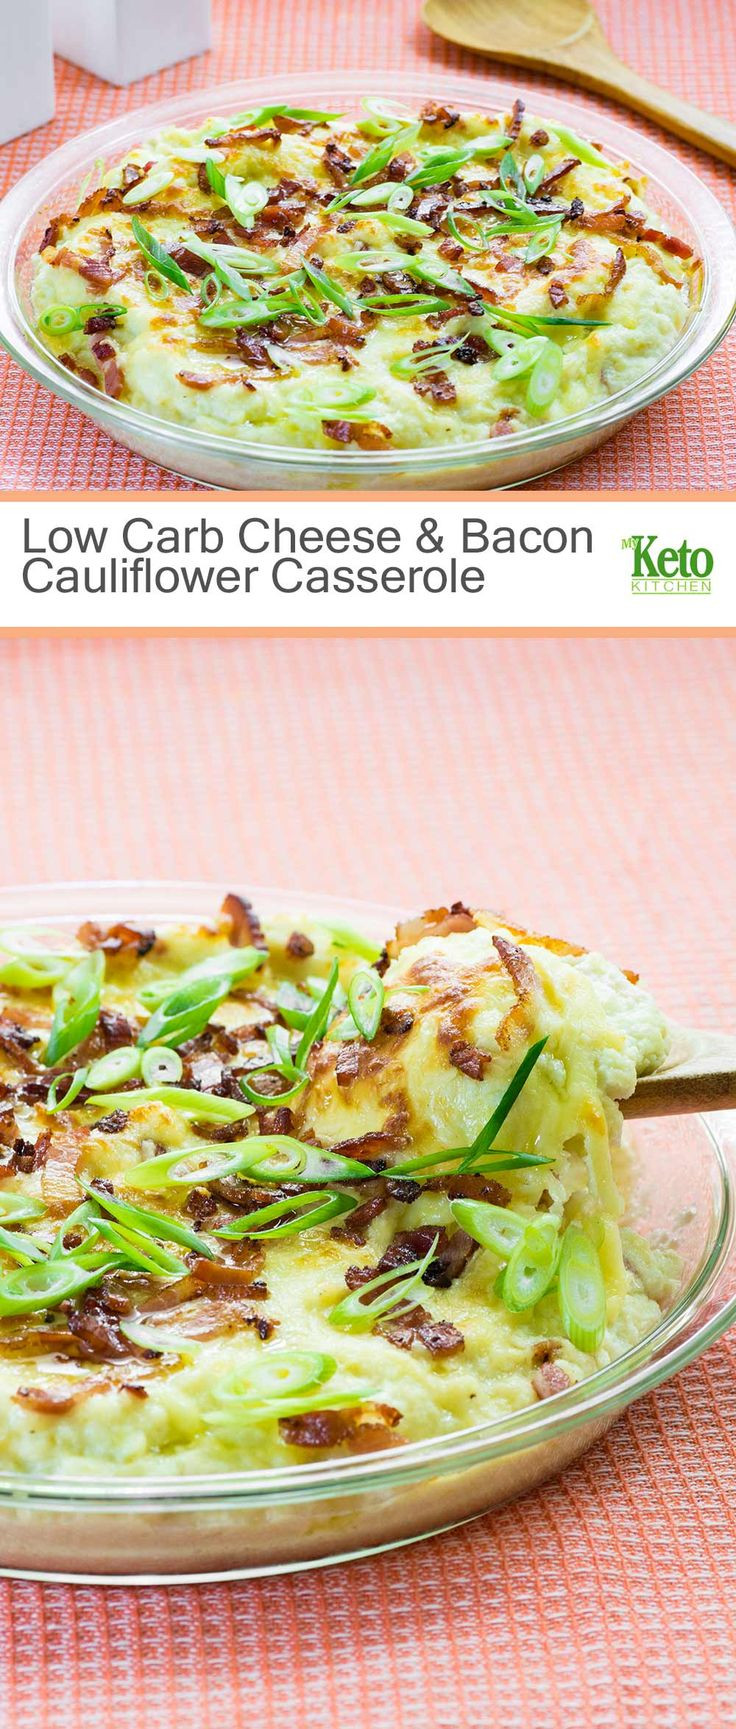 Low Carb Bacon Recipes
 Low Carb Cheese & Bacon Cauliflower Casserole